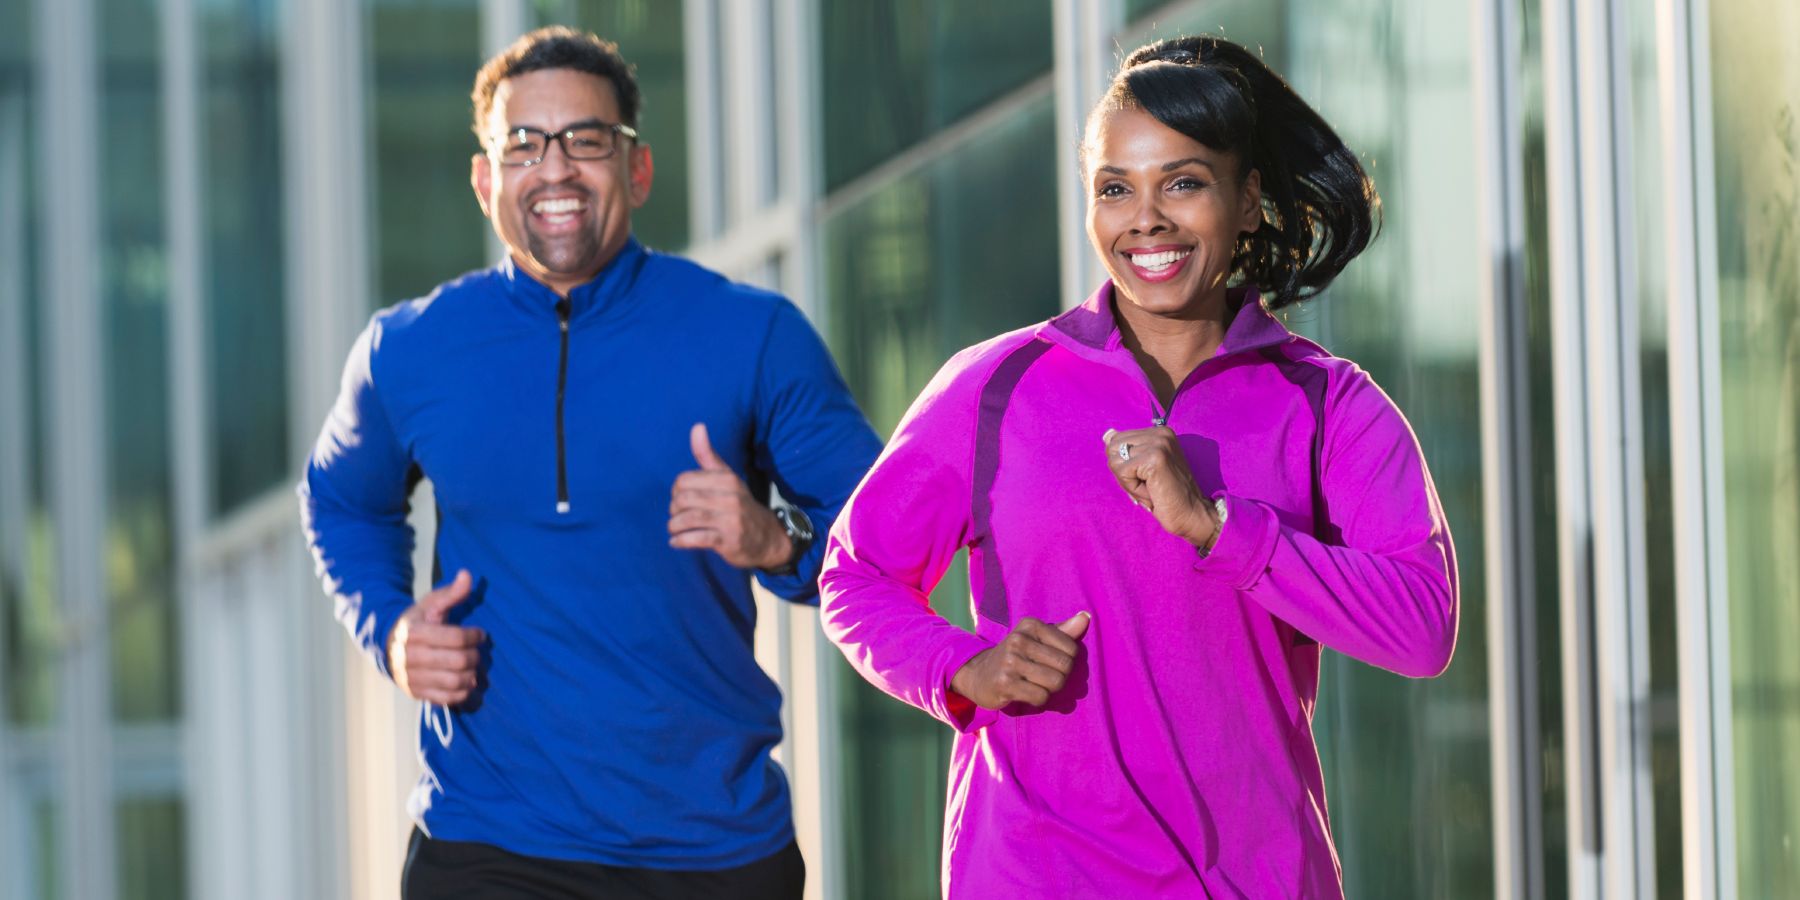 A happy, mature, African American couple, in their 40s, jogging or running on a city sidewalk, next to an office building. The woman is in focus, running in front, with the man a few steps behind. They are wearing colorful sweatshirts, purple and royal blue, and dark gray pants. They are both smiling.